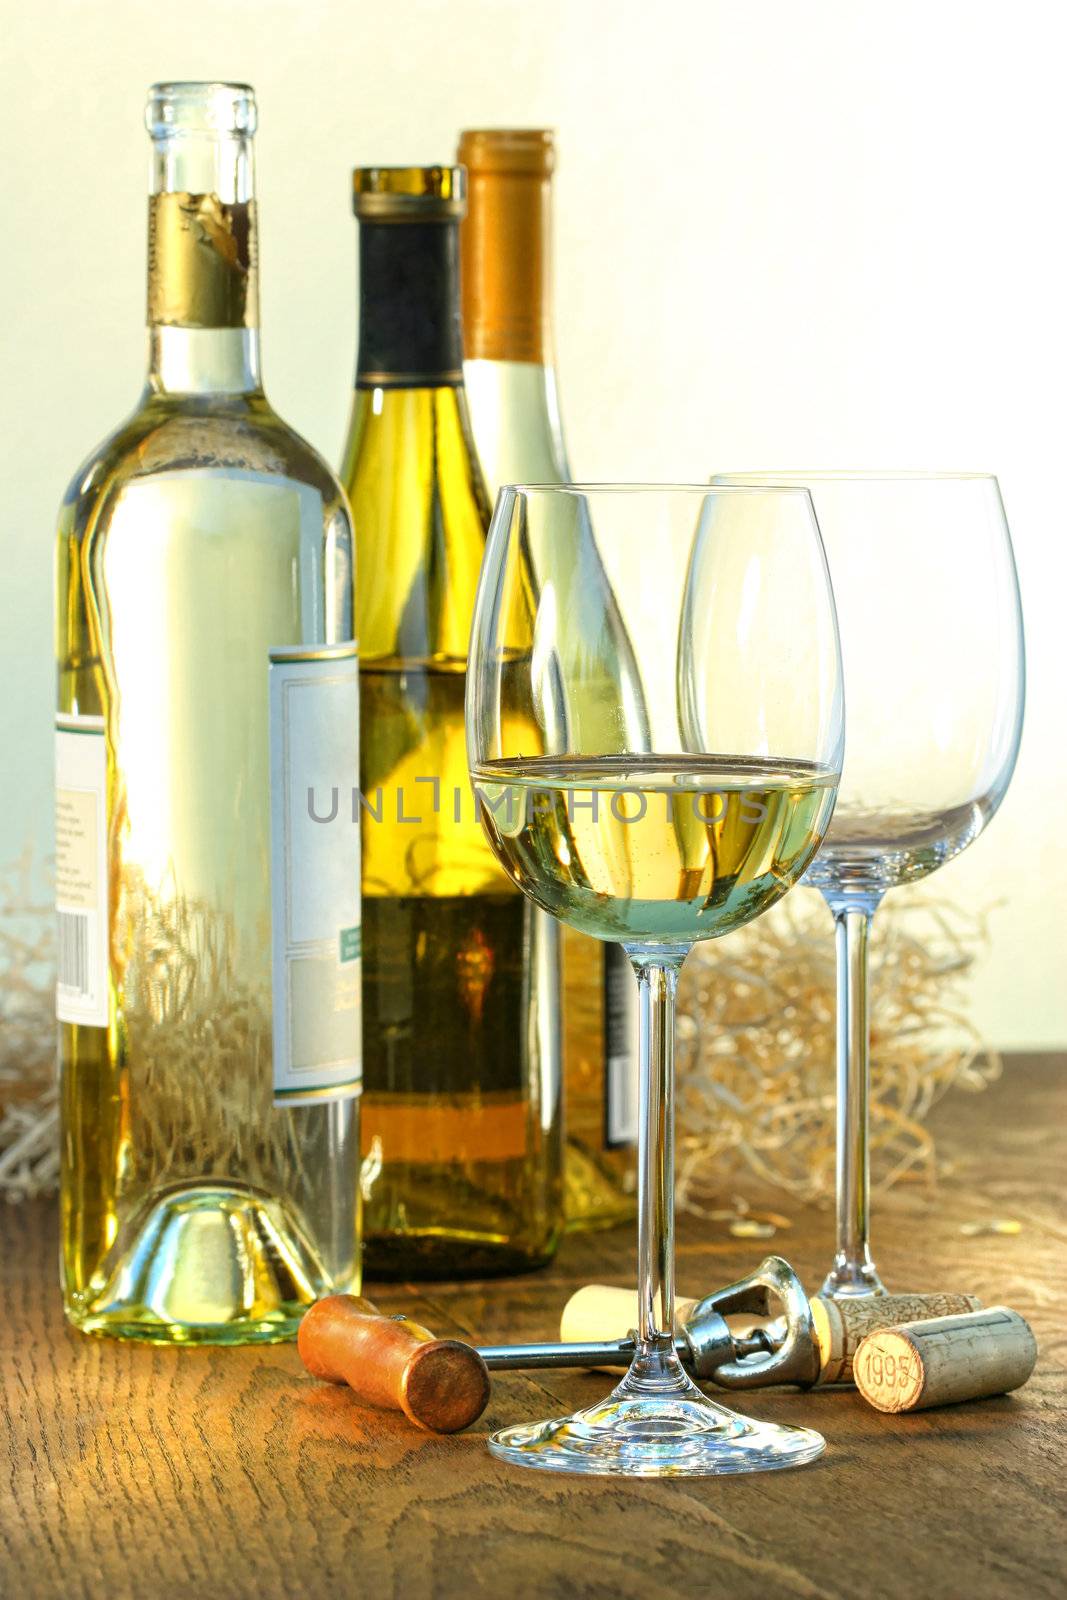 Bottles of white wine with glasses  by Sandralise